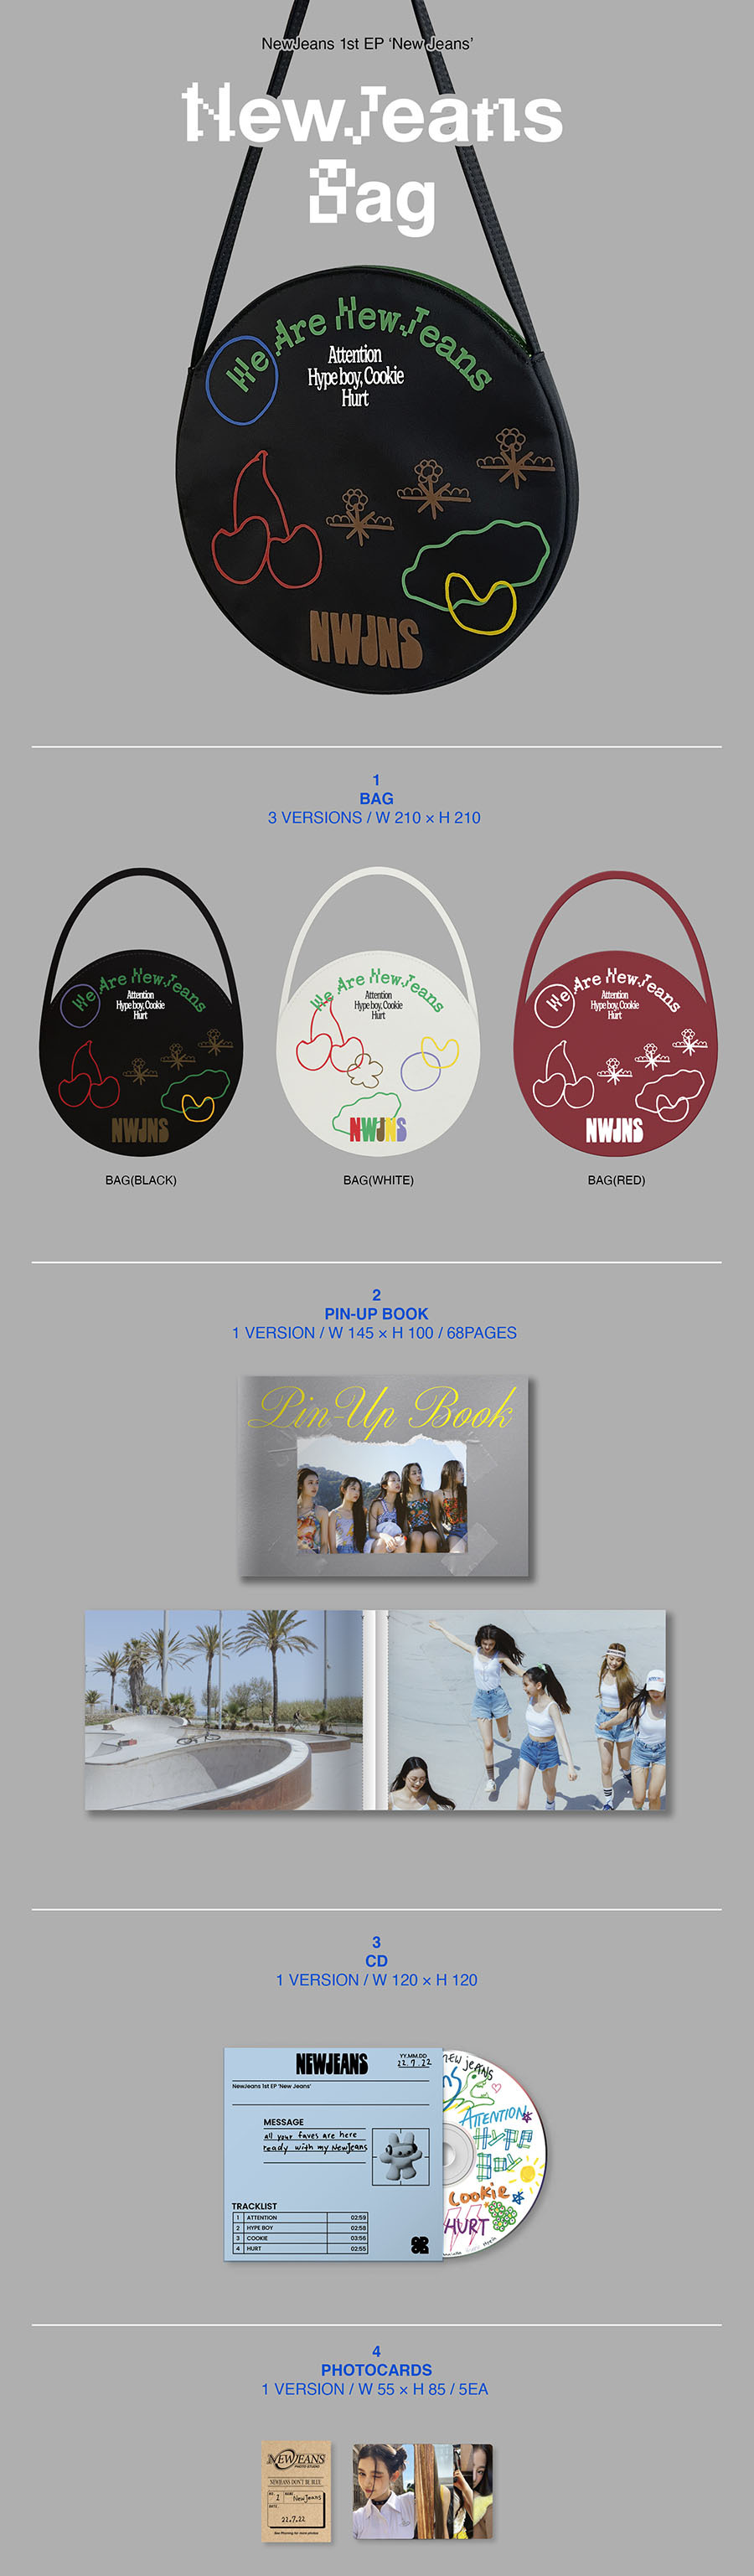 NewJeans - 1st EP [New Jeans] Bag(White)ver. (Limited ver.) kpop kpopgirl NewJeans NewJeansalbum NewJeans1st NewJeansbag NewJeansLimited